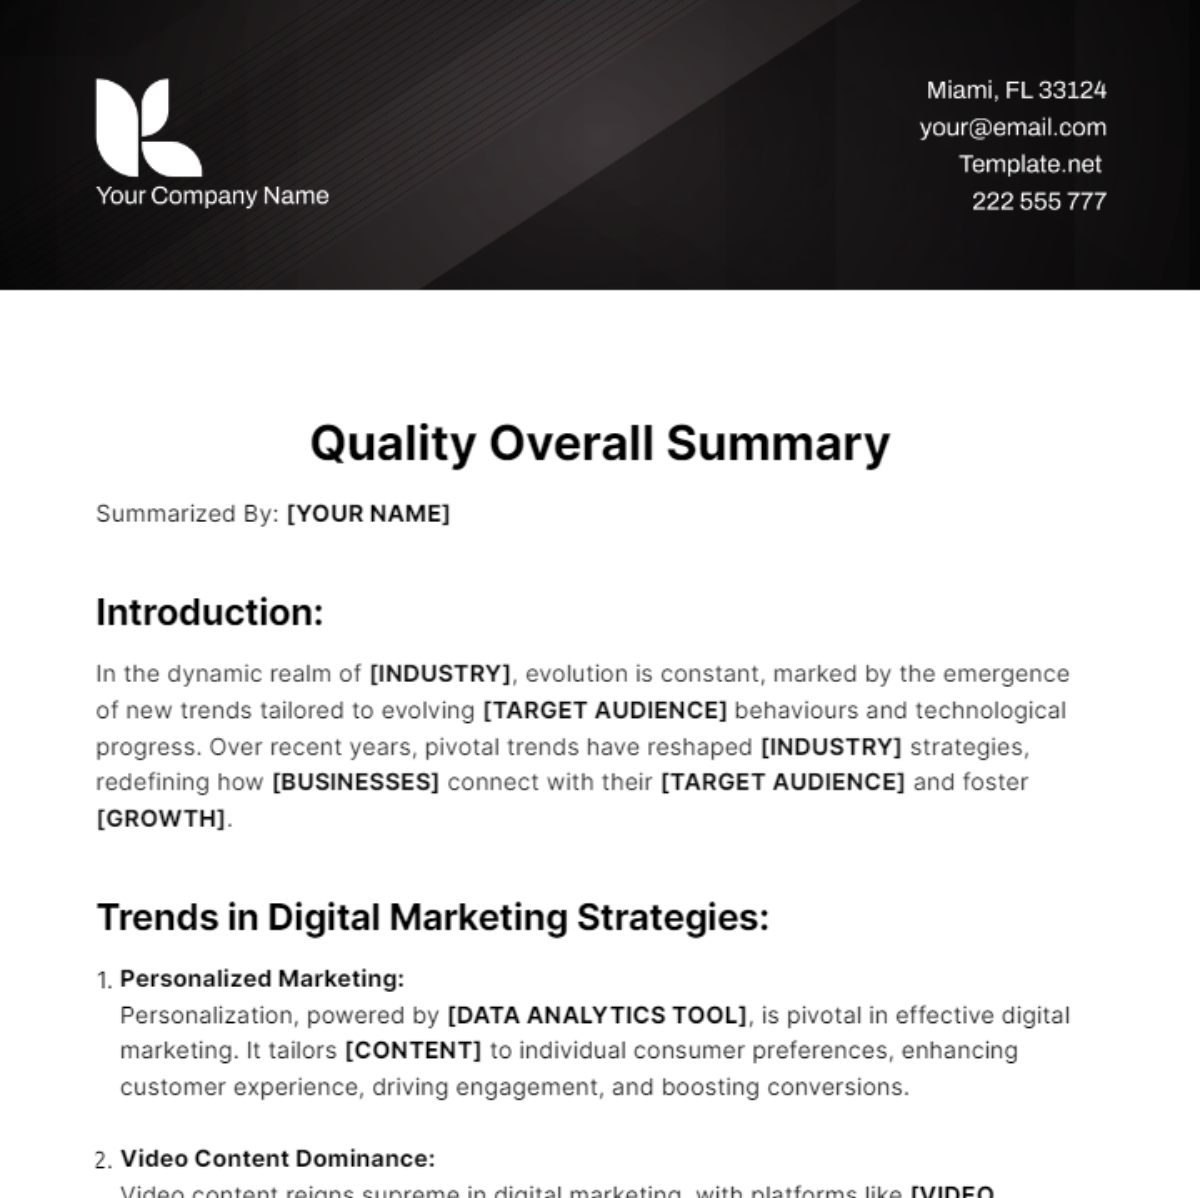 Quality Overall Summary Template